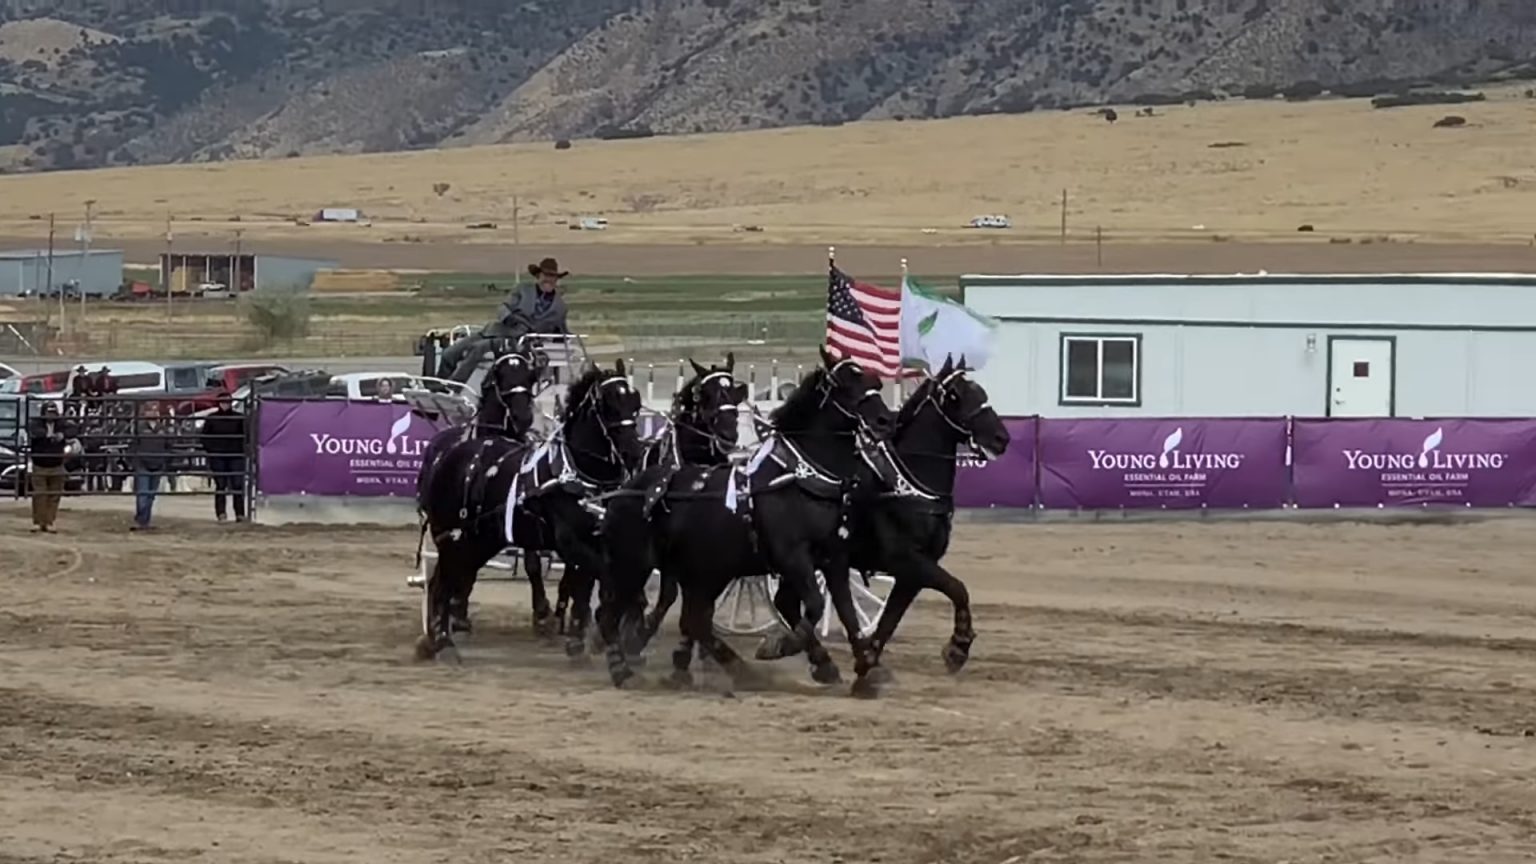 Magnificent Horses Deliver A Special Performance At The Draft Horse